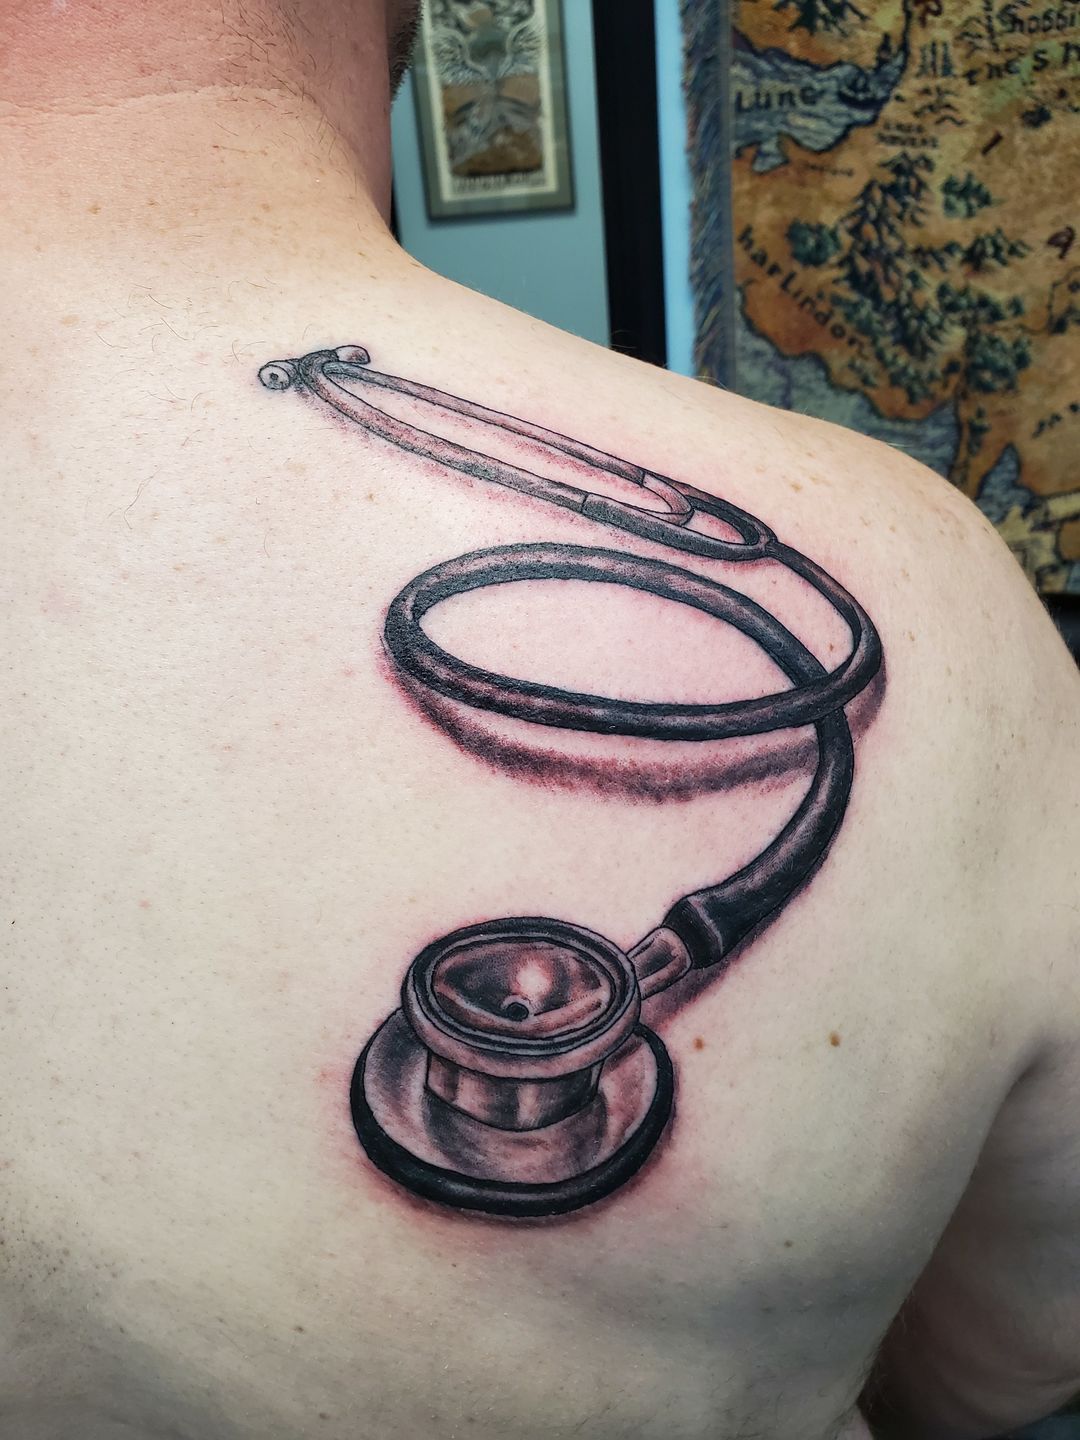 Northside Tattooz on Twitter Old fashioned stethoscope tattoo by Dave  Simpson To book in with Dave message him directly or contact via our site  httpstco0ErQvAPDSs northsidetattooz Newcastle stethoscopetattoo  stethoscope flowertattoo 